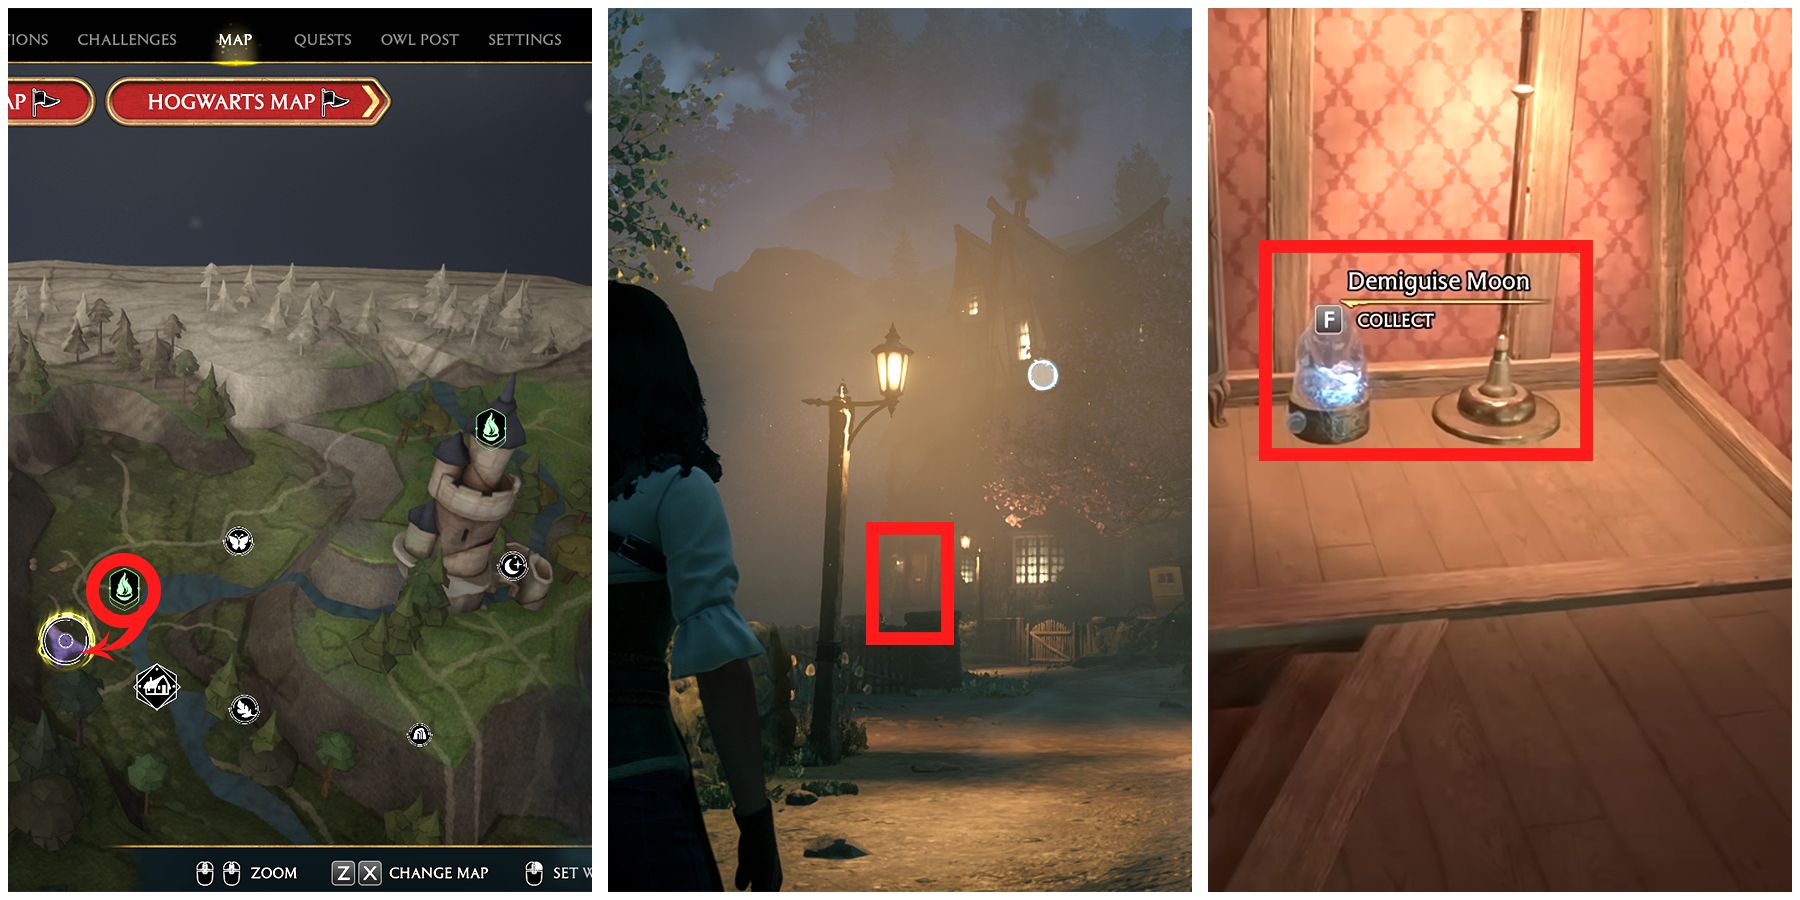 demiguise statue 27 location in hogwarts legacy